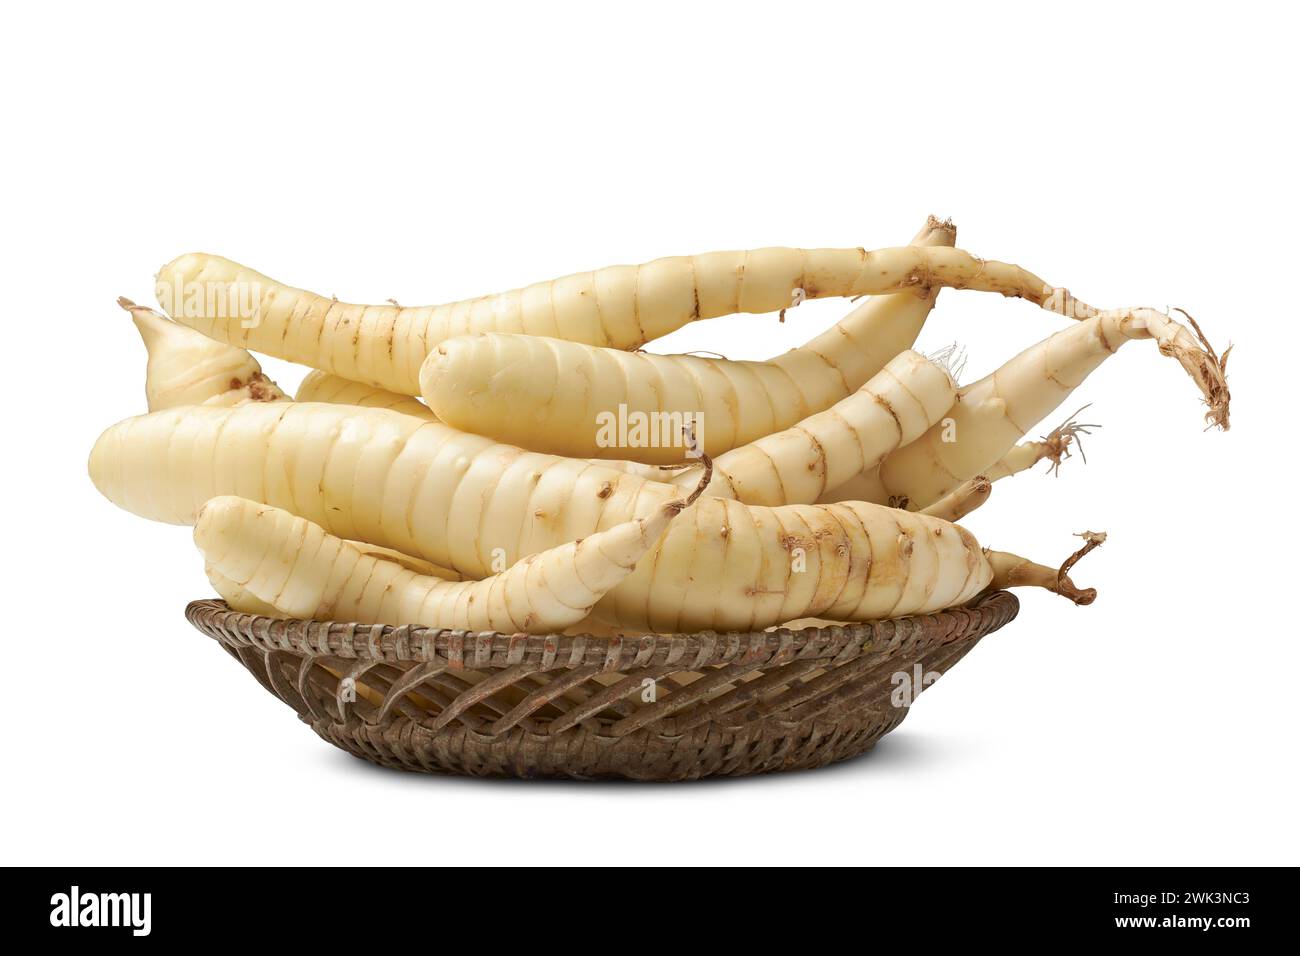 organic arrowroot rhizomes on a tray, maranta arundinacea, tropical plant known for starchy rhizomes harvested for various culinary purposes, as glute Stock Photo